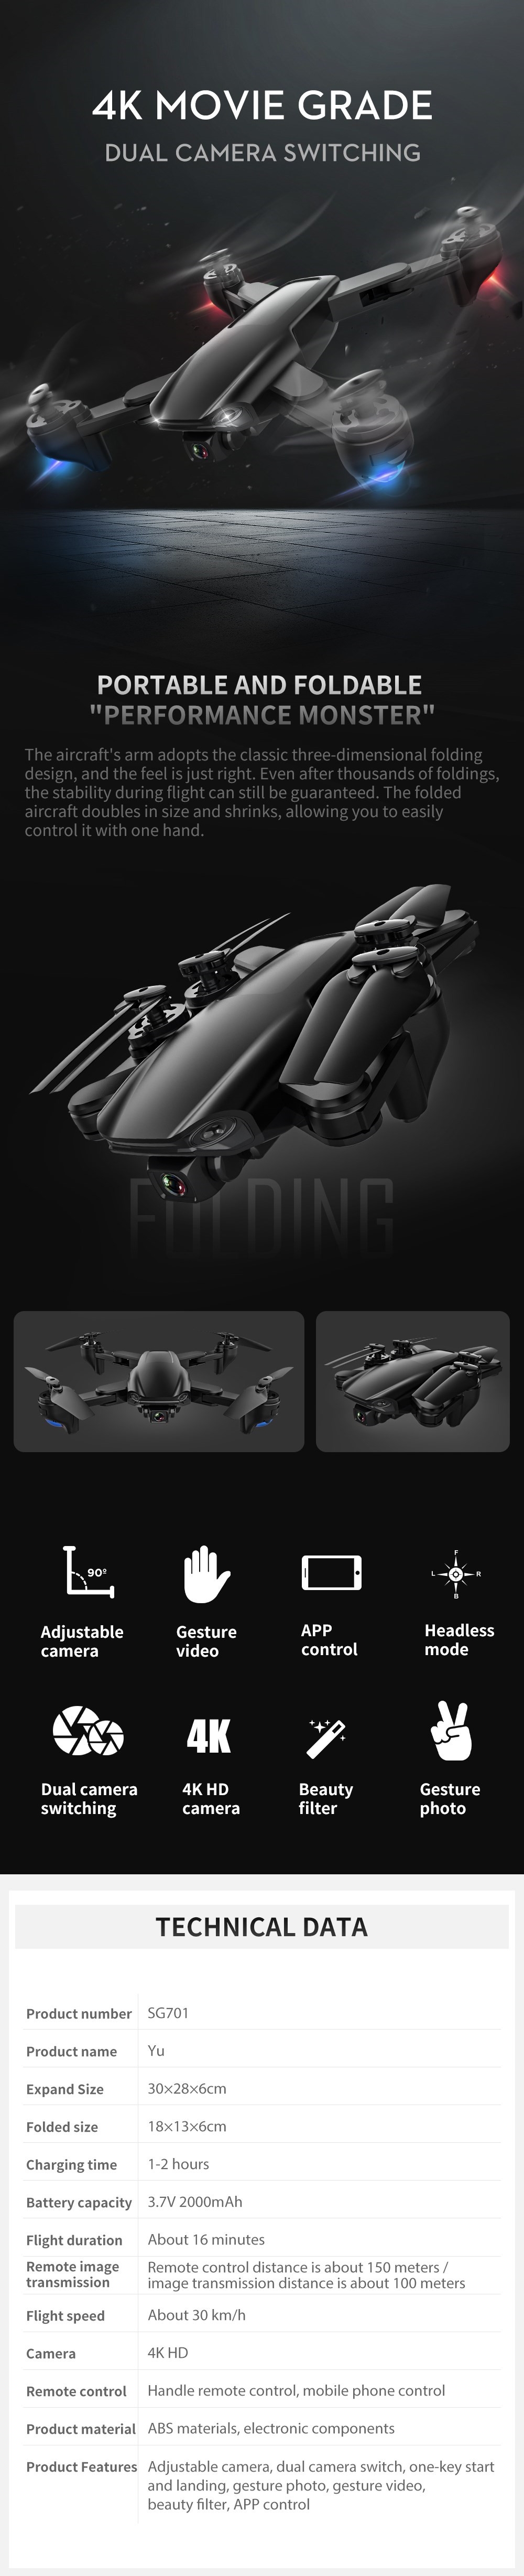 ZLRC SG701 2.4G WIFI FPV With 4K 720P Switchable Dual Cameras Foldable RC Quadcopter Drone RTF